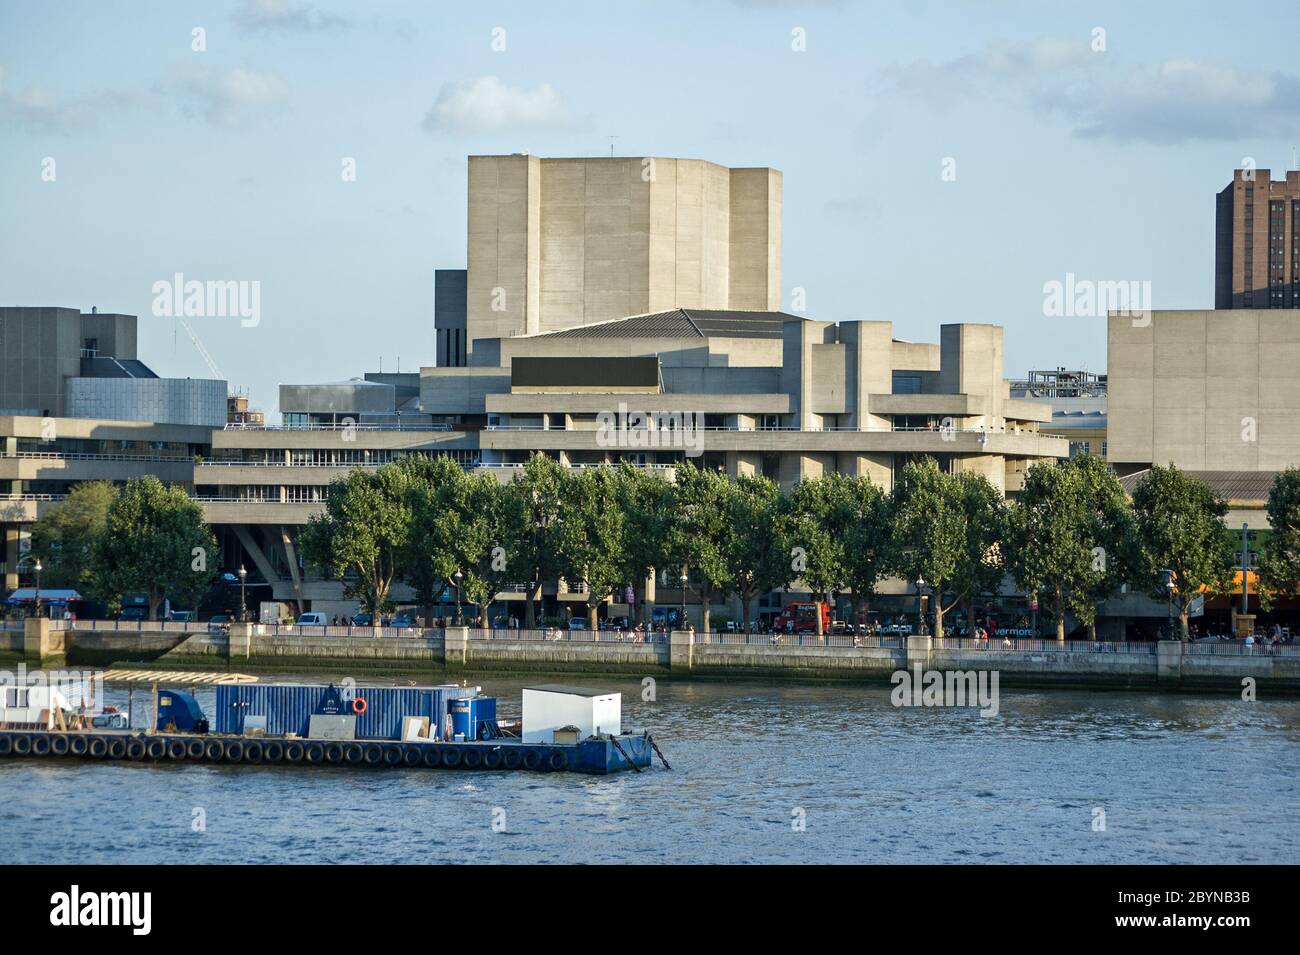 View across the River Thames at Waterloo Bridge looking towards the National Theatre on the South Bank at Lambeth, London. Stock Photo